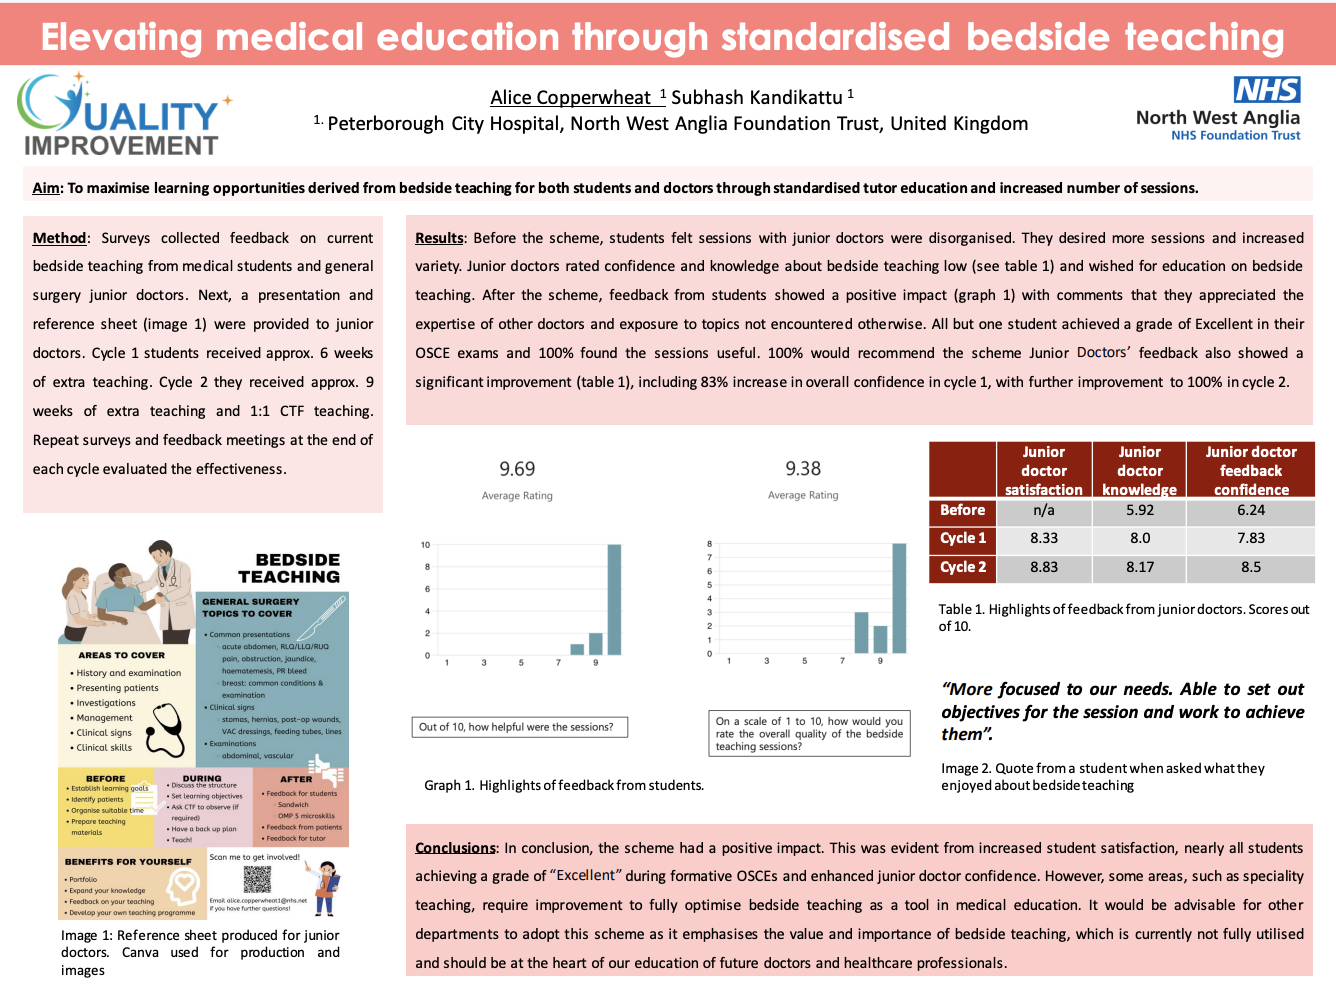 Elevating Medical Education Through Standardised Bedside Teaching featured image